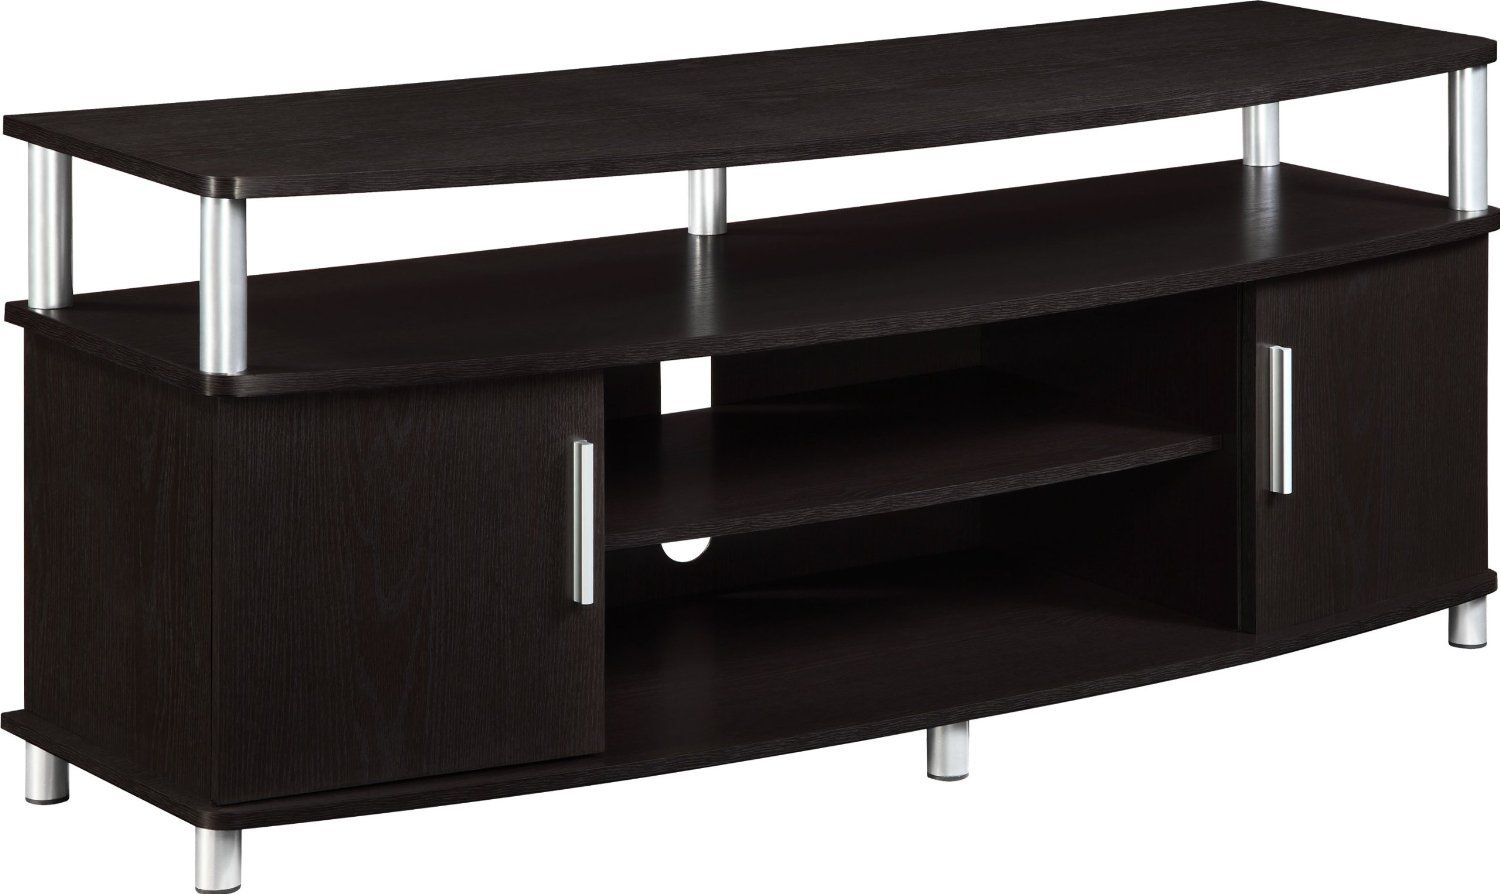 The 9 Best TV Stands to Buy in 2018